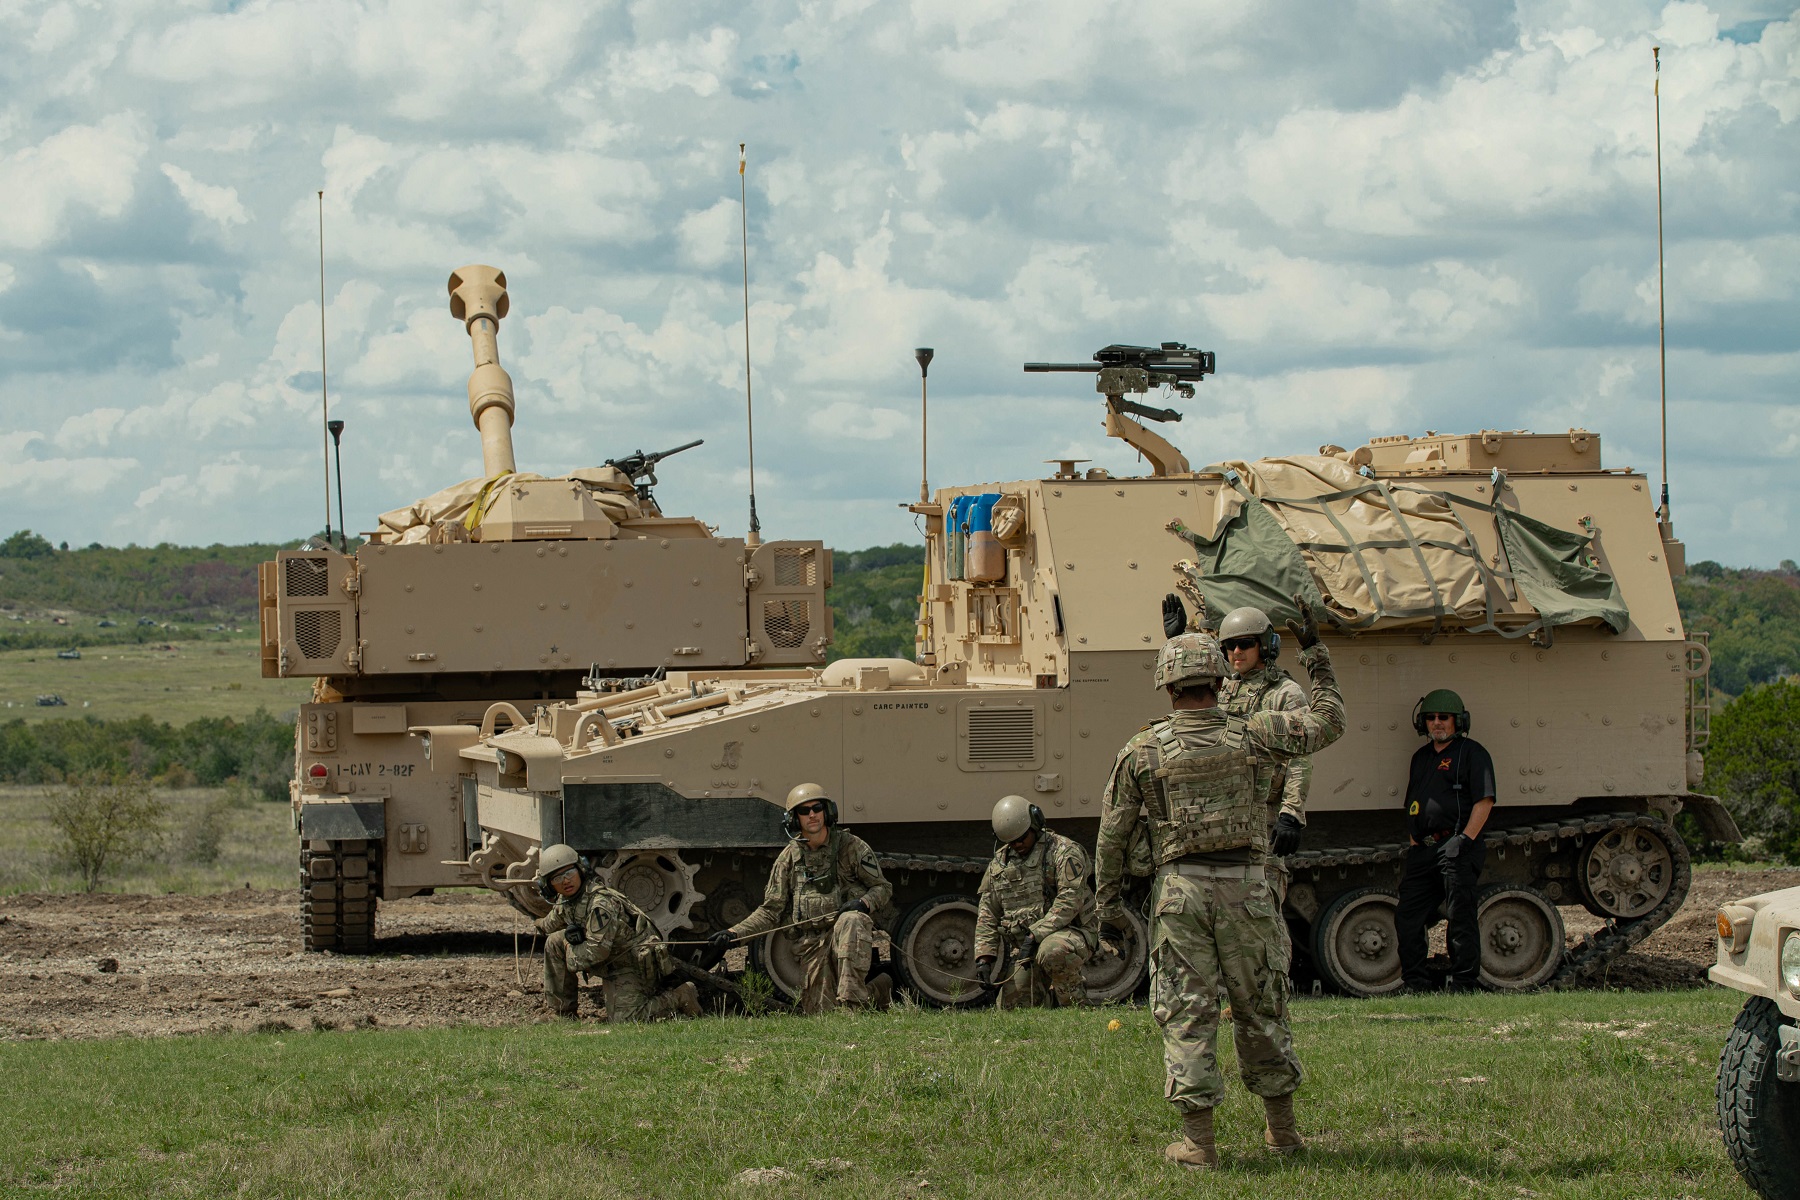 US Army M109A7 self-propelled howitzer and M992A3 field artillery ammunition support vehicle.